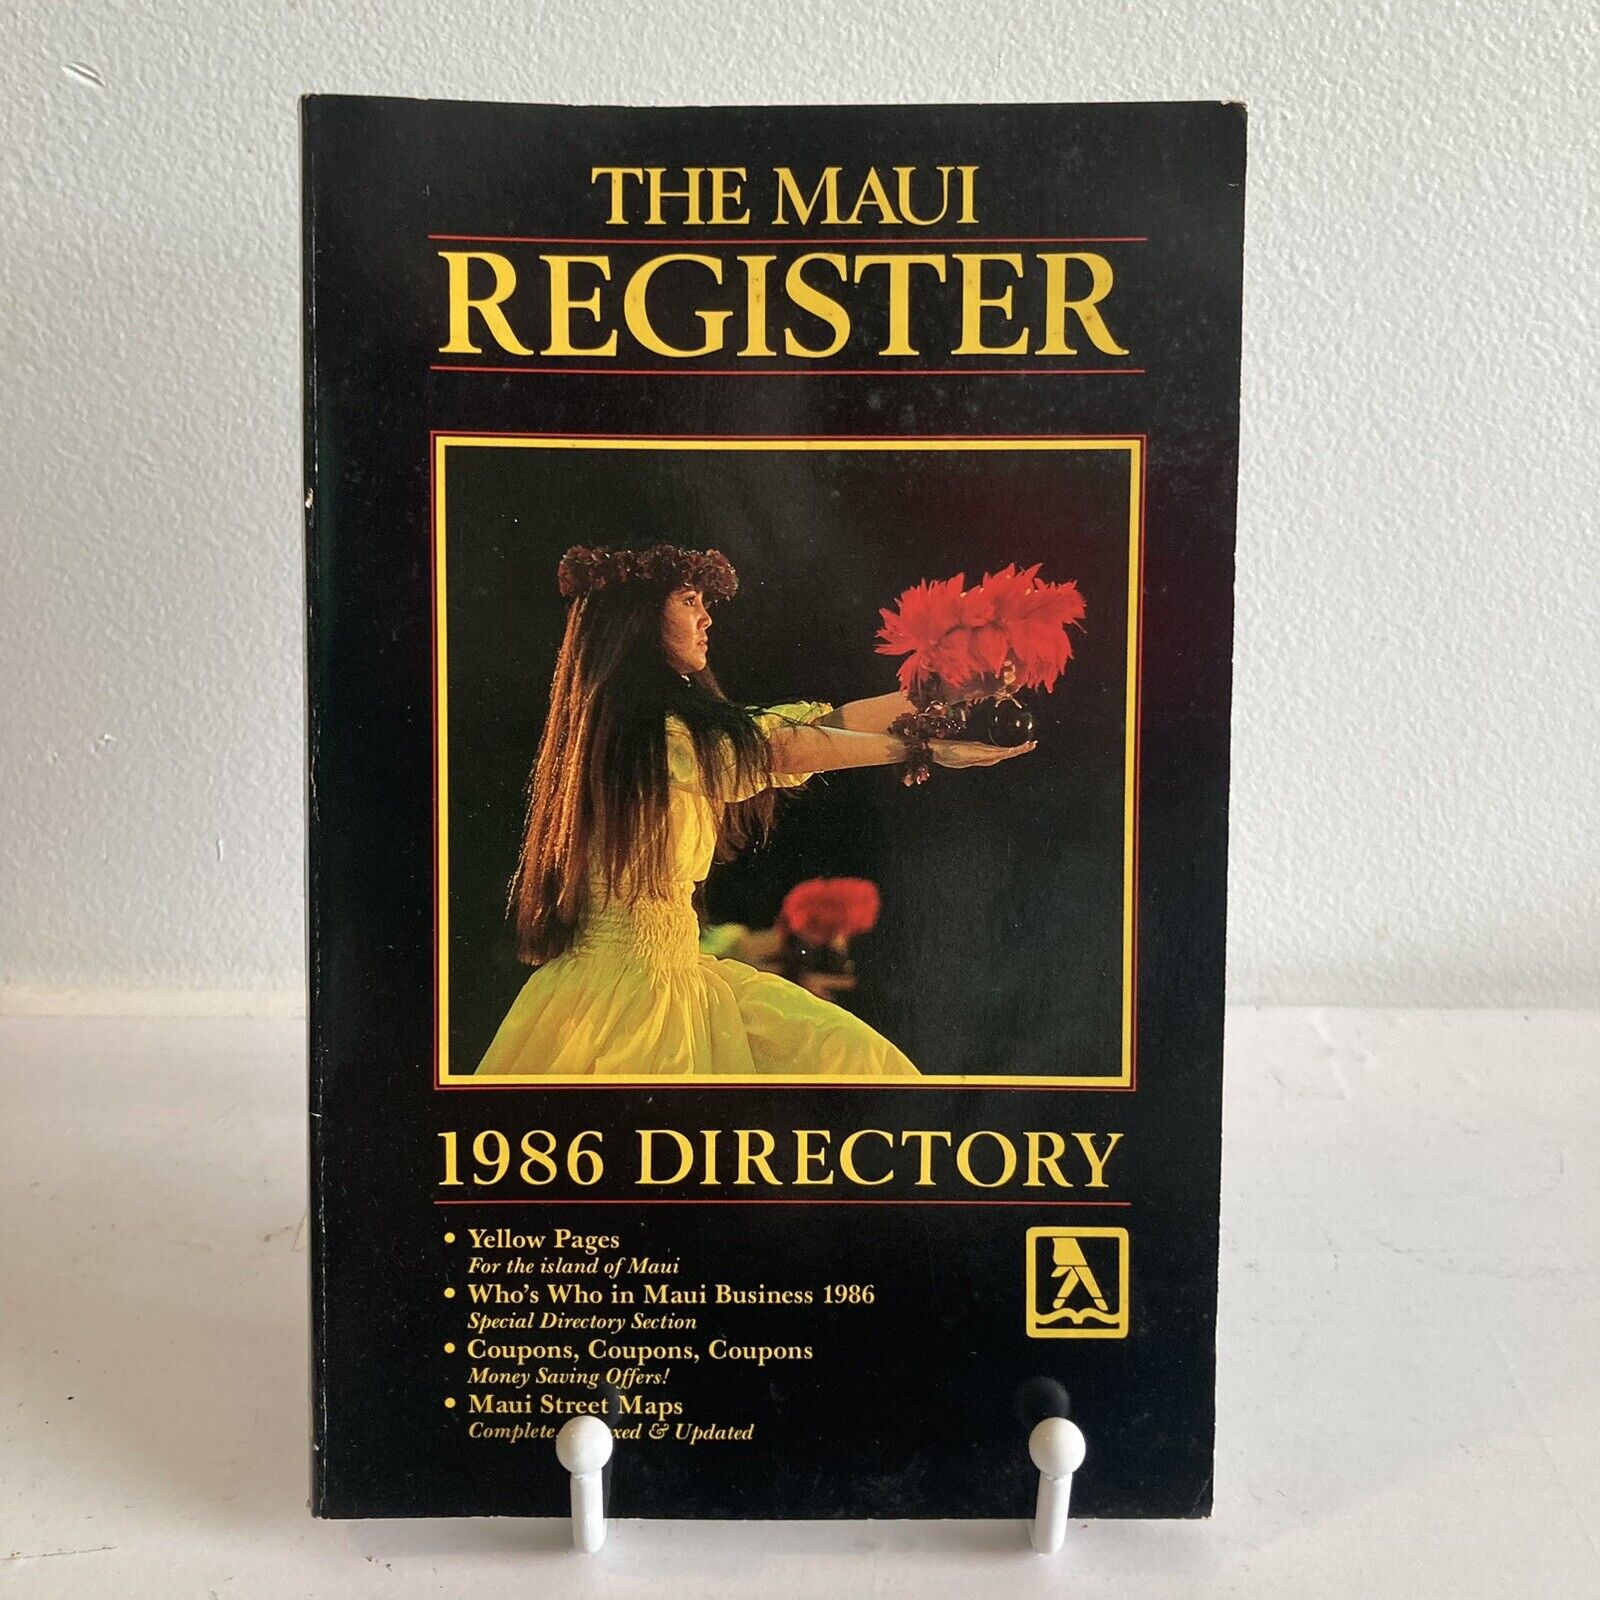 The Maui Register: 1986 Directory - Yellow Pages - Who’s Who